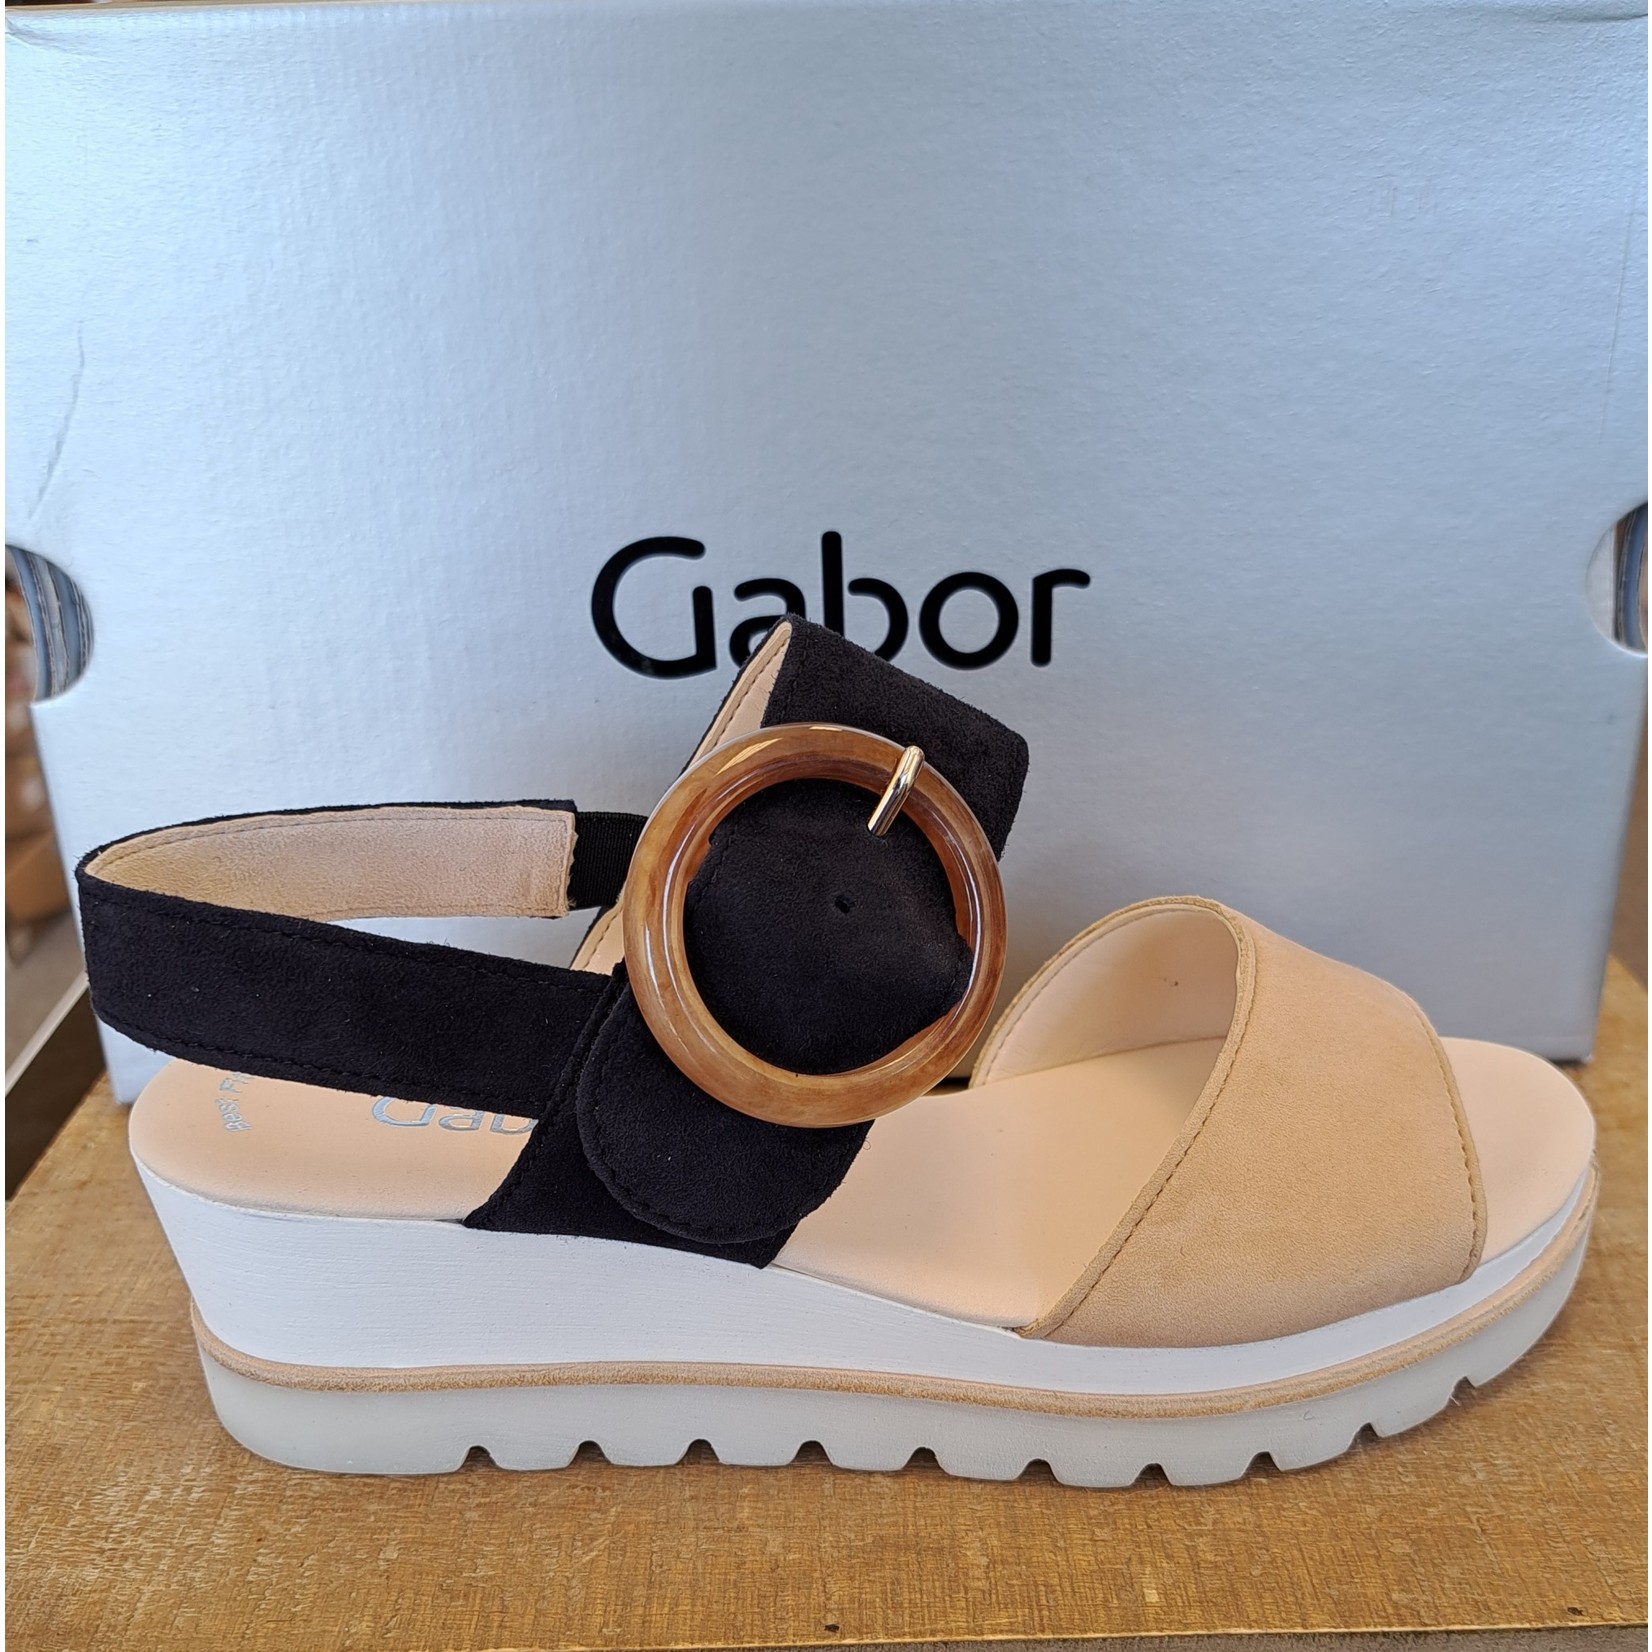 Gabor Kate Wedge in Navy and Caramel Suede by Gabor 24.645.30